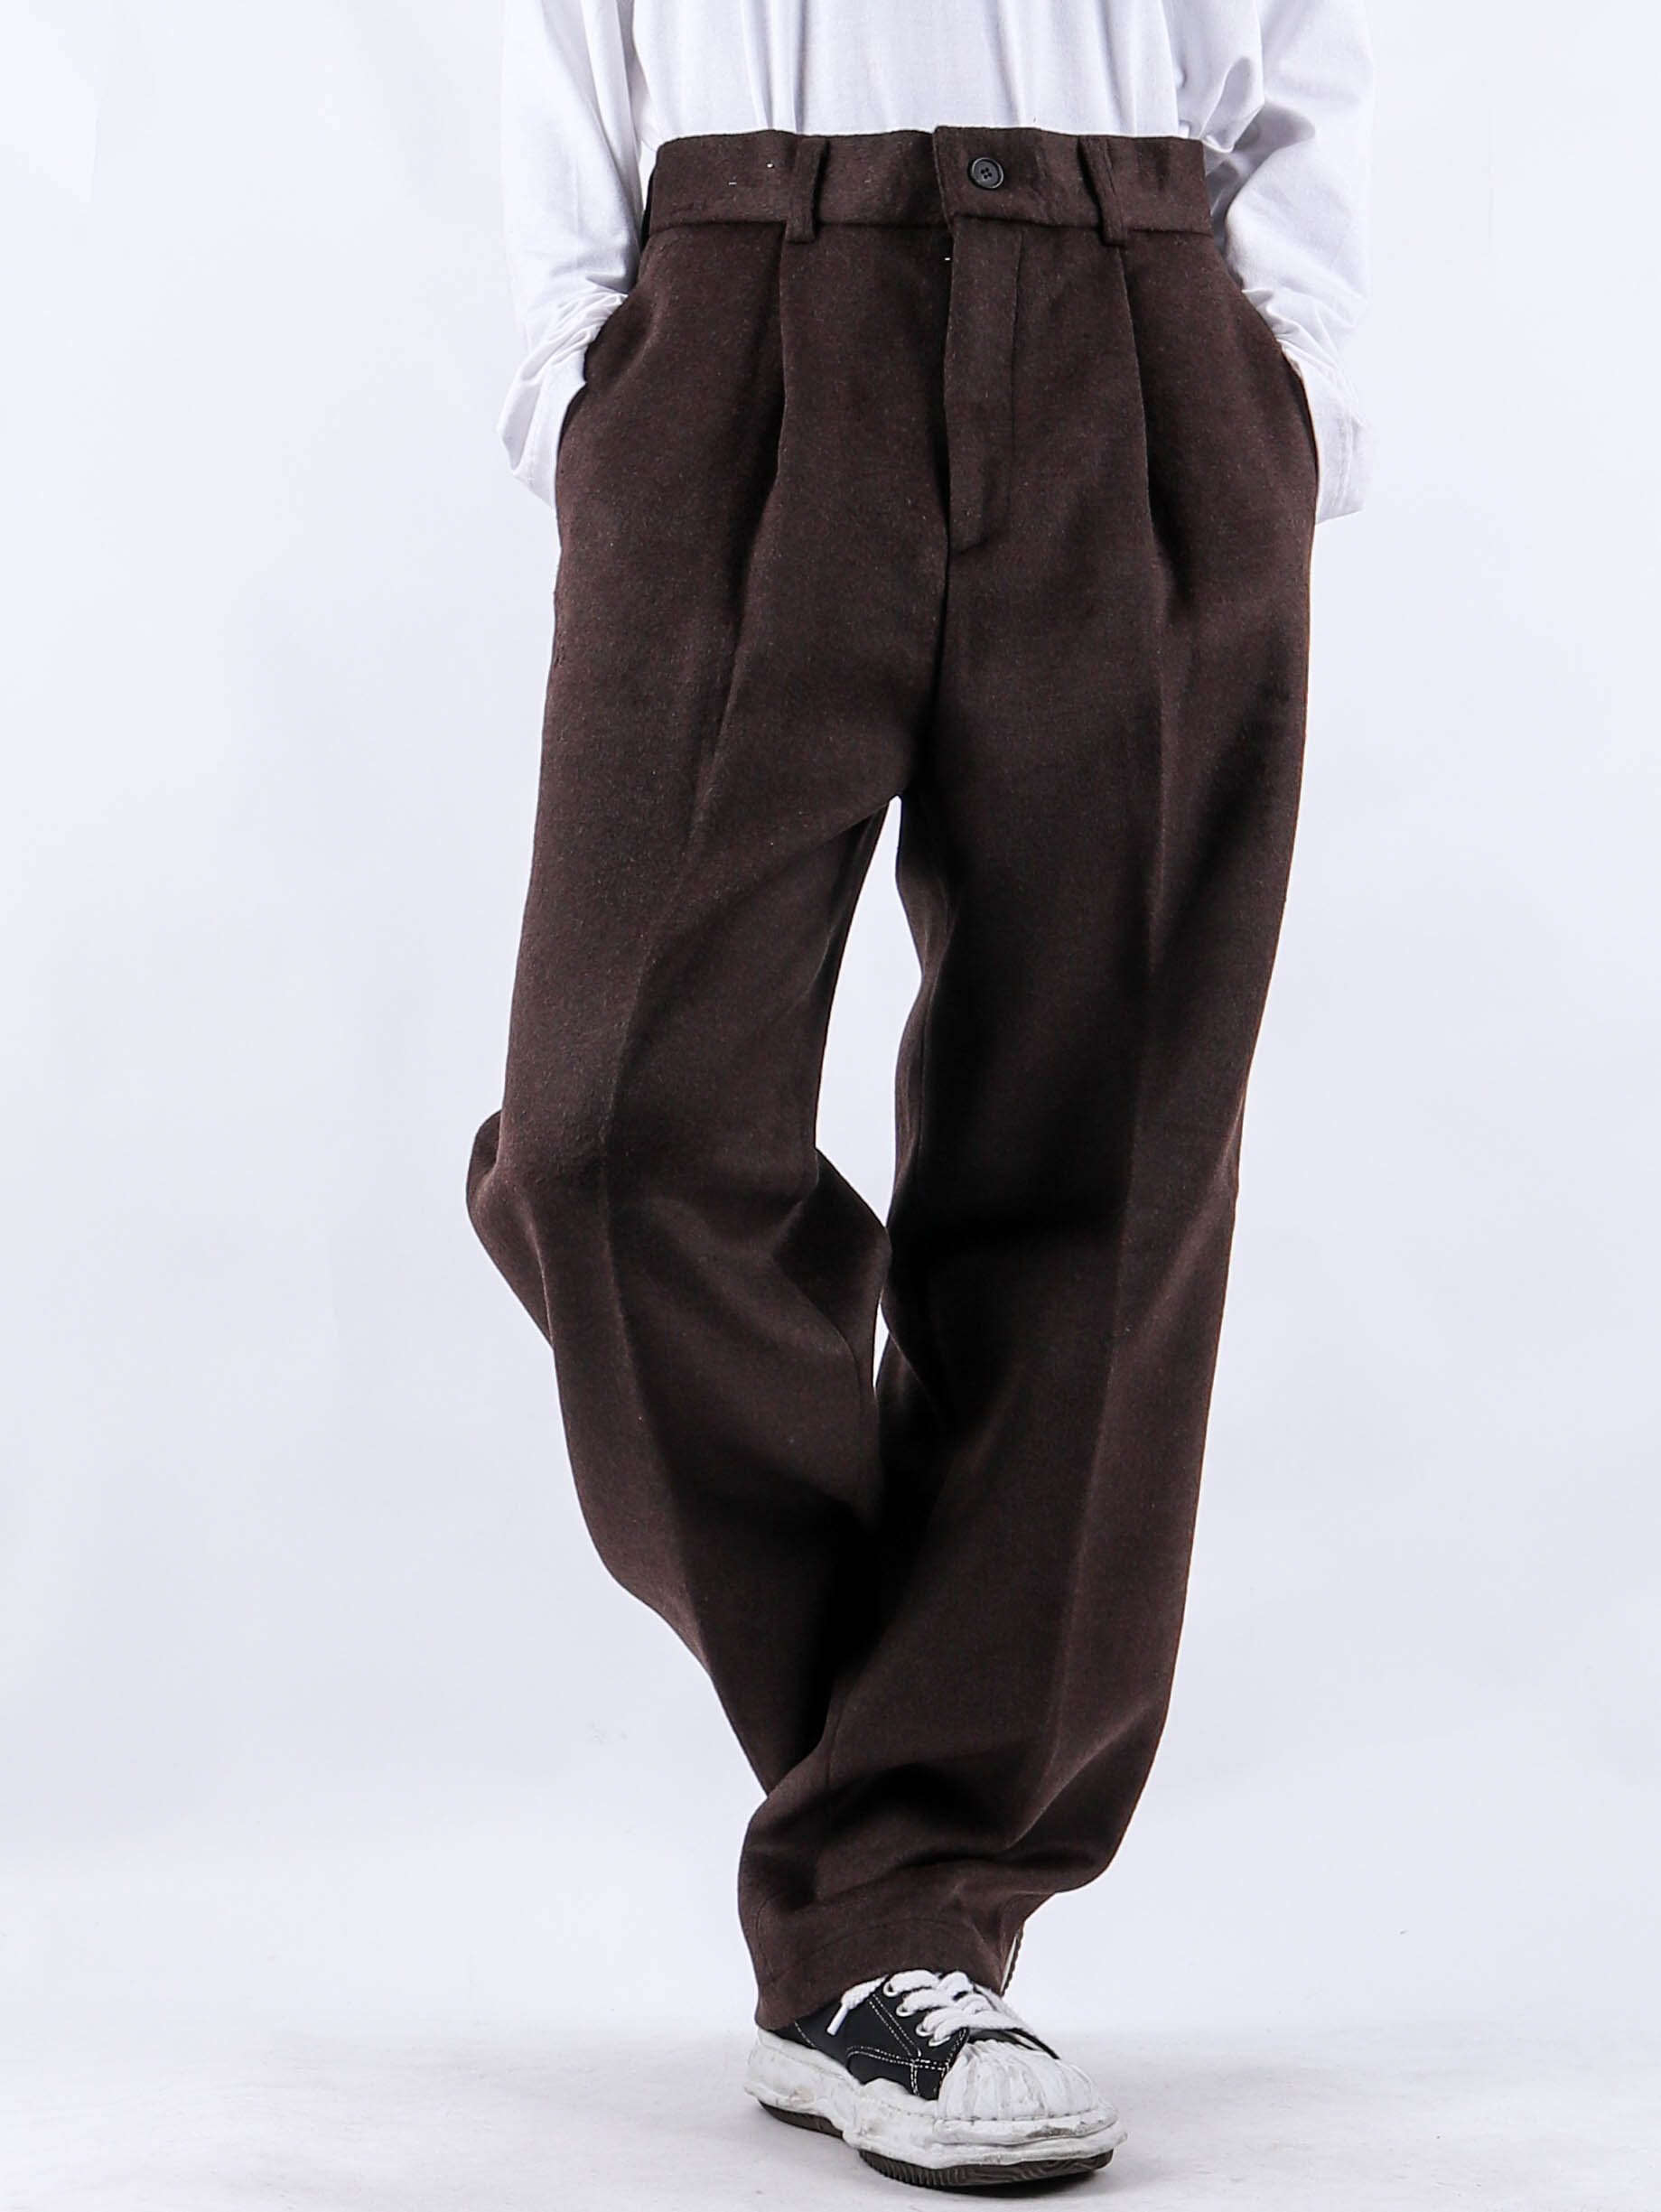 NM And Wool Pants (3color)